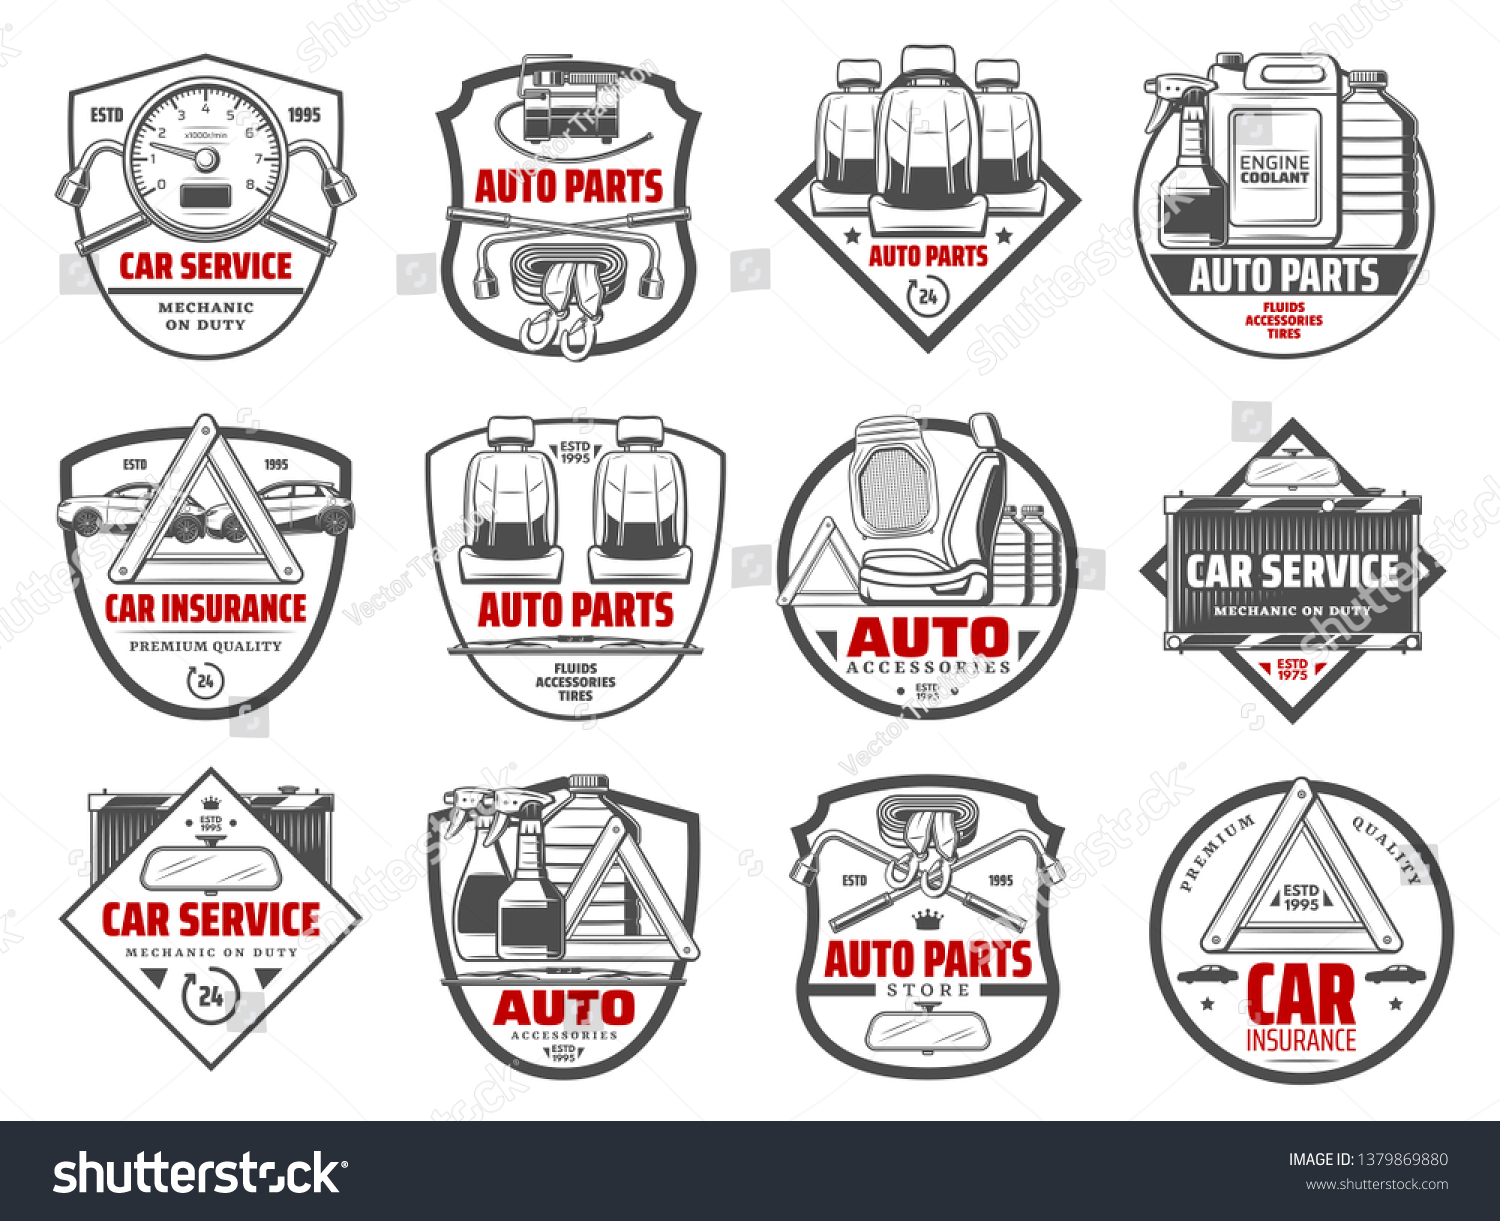 SVG of Auto spare parts and car accessory workshop icons. Vector tow belt, oils and chemical fluids, automotive service lung wrench tool and radiator, upholstery replacement and mechanic station sign svg